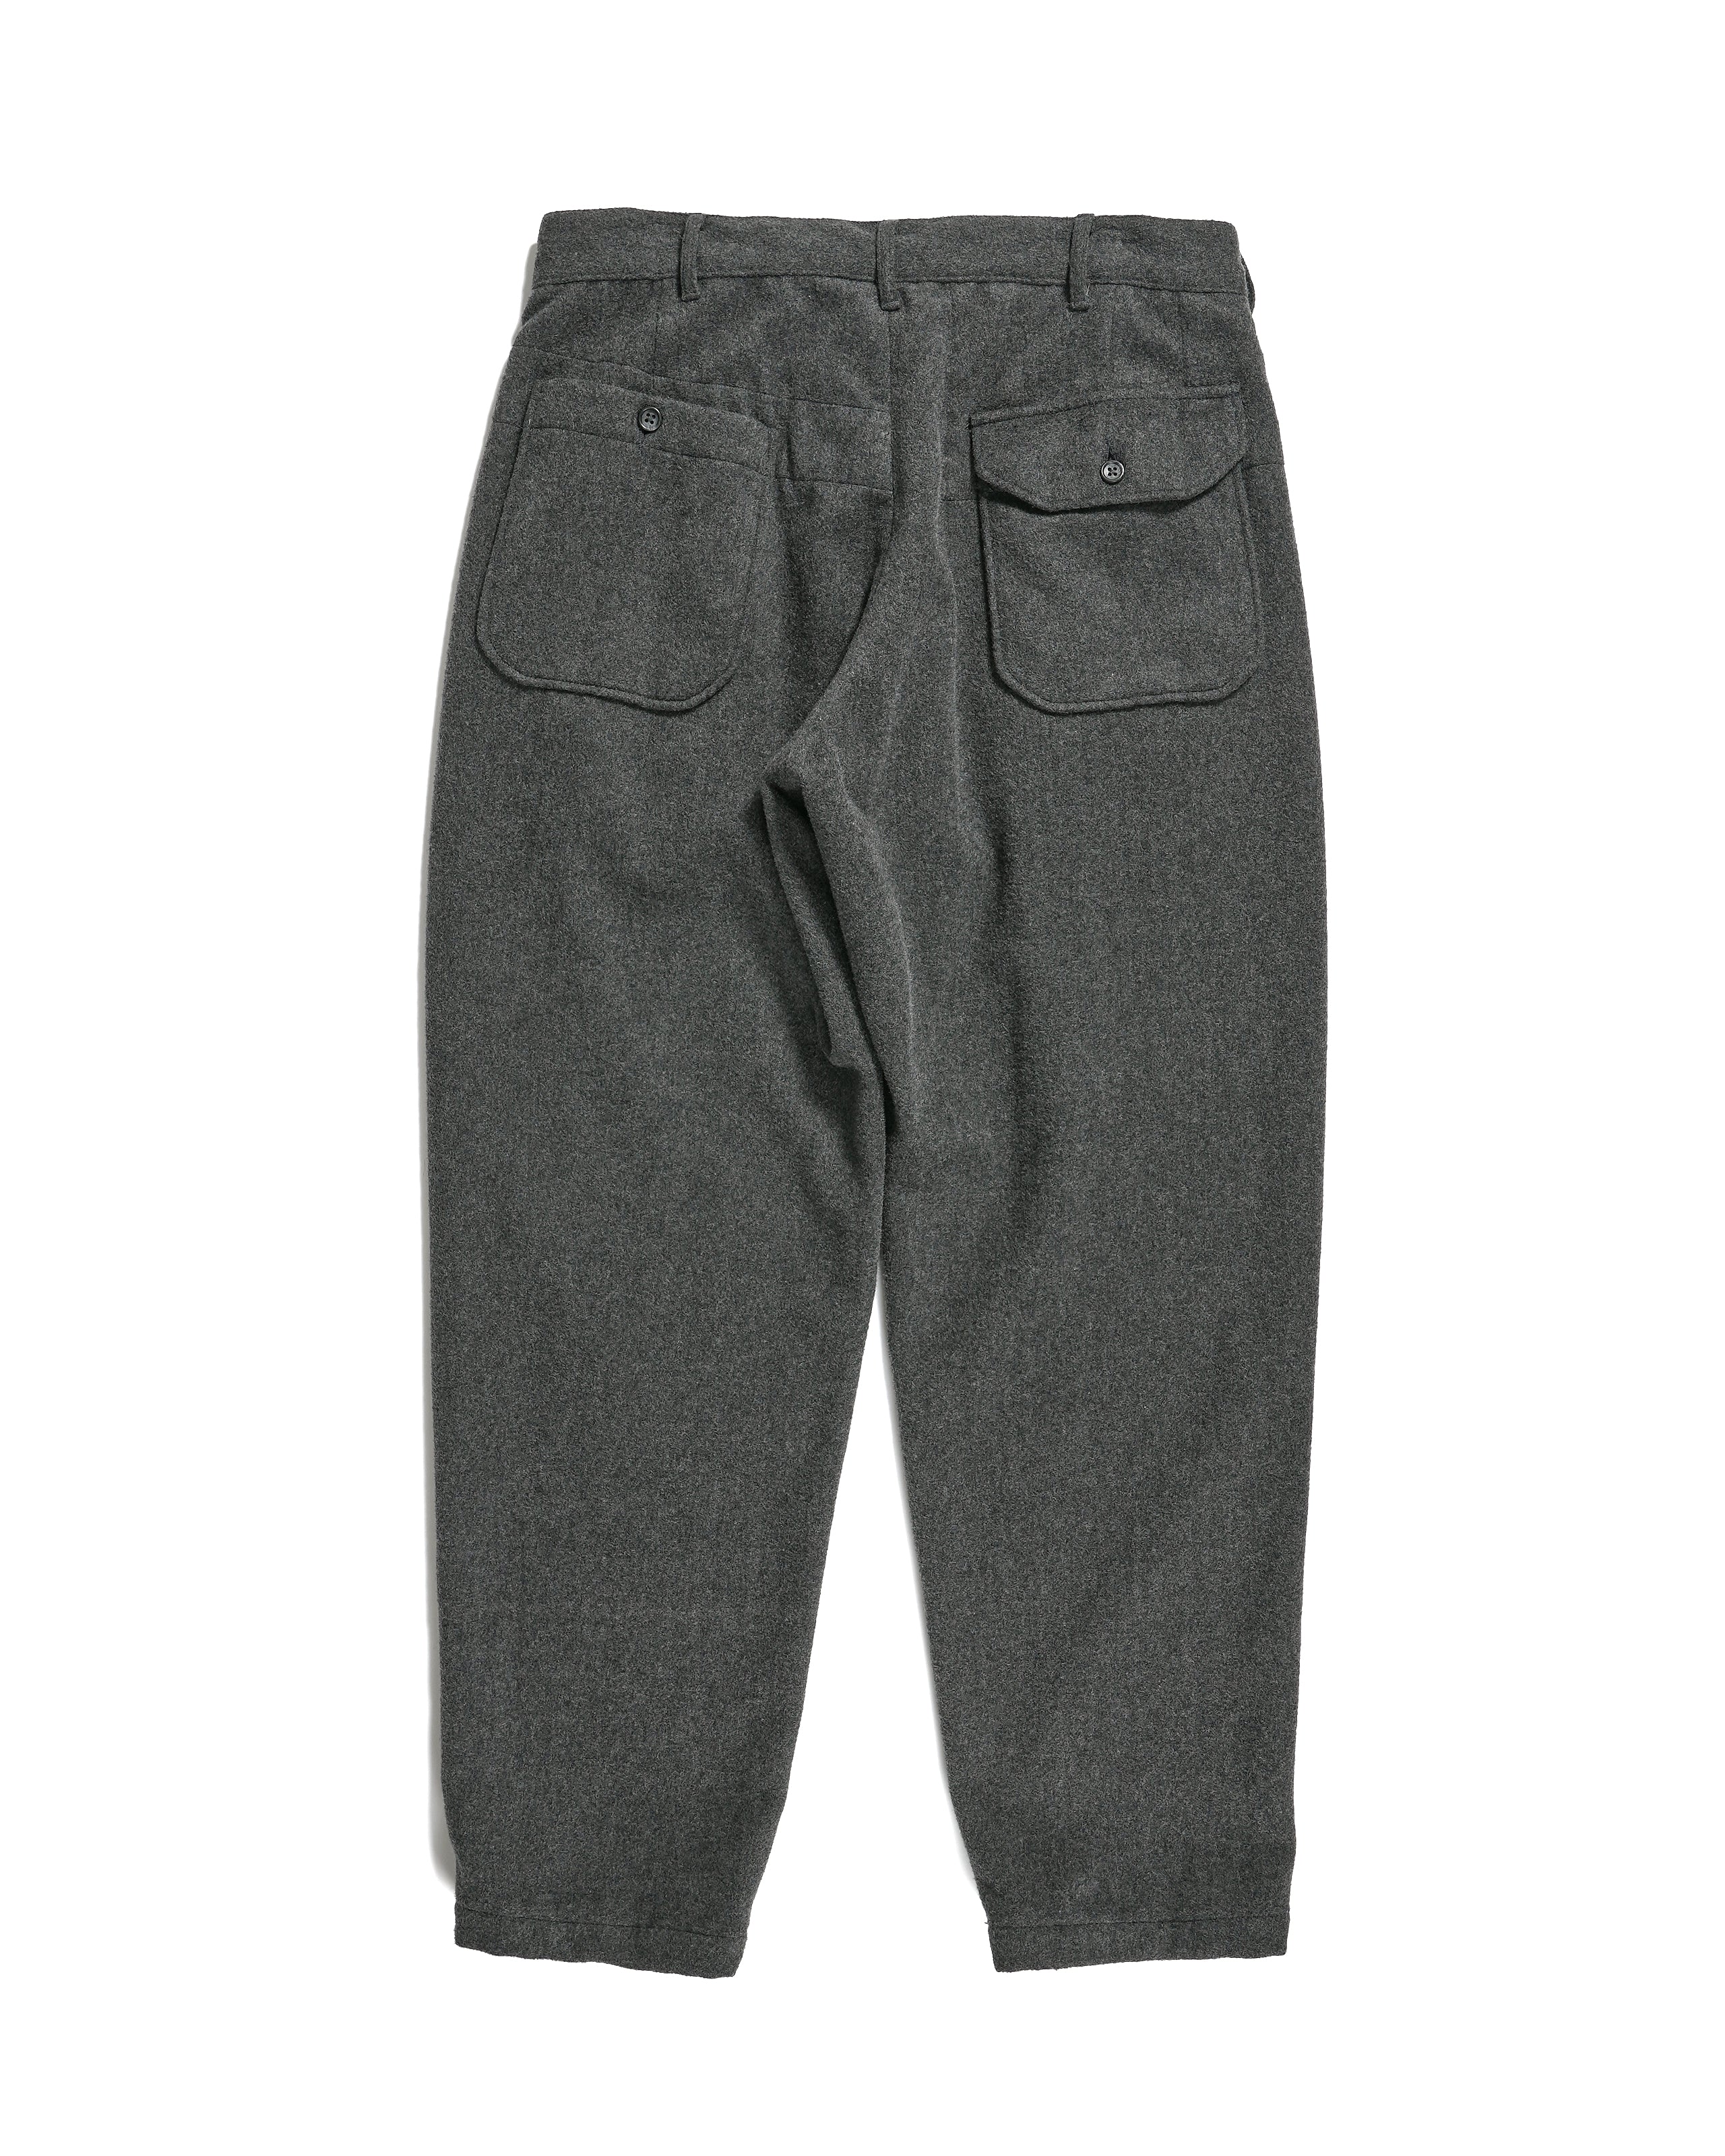 Engineered Garments Carlyle Pant - Grey Wool Polyester Heavy Flannel